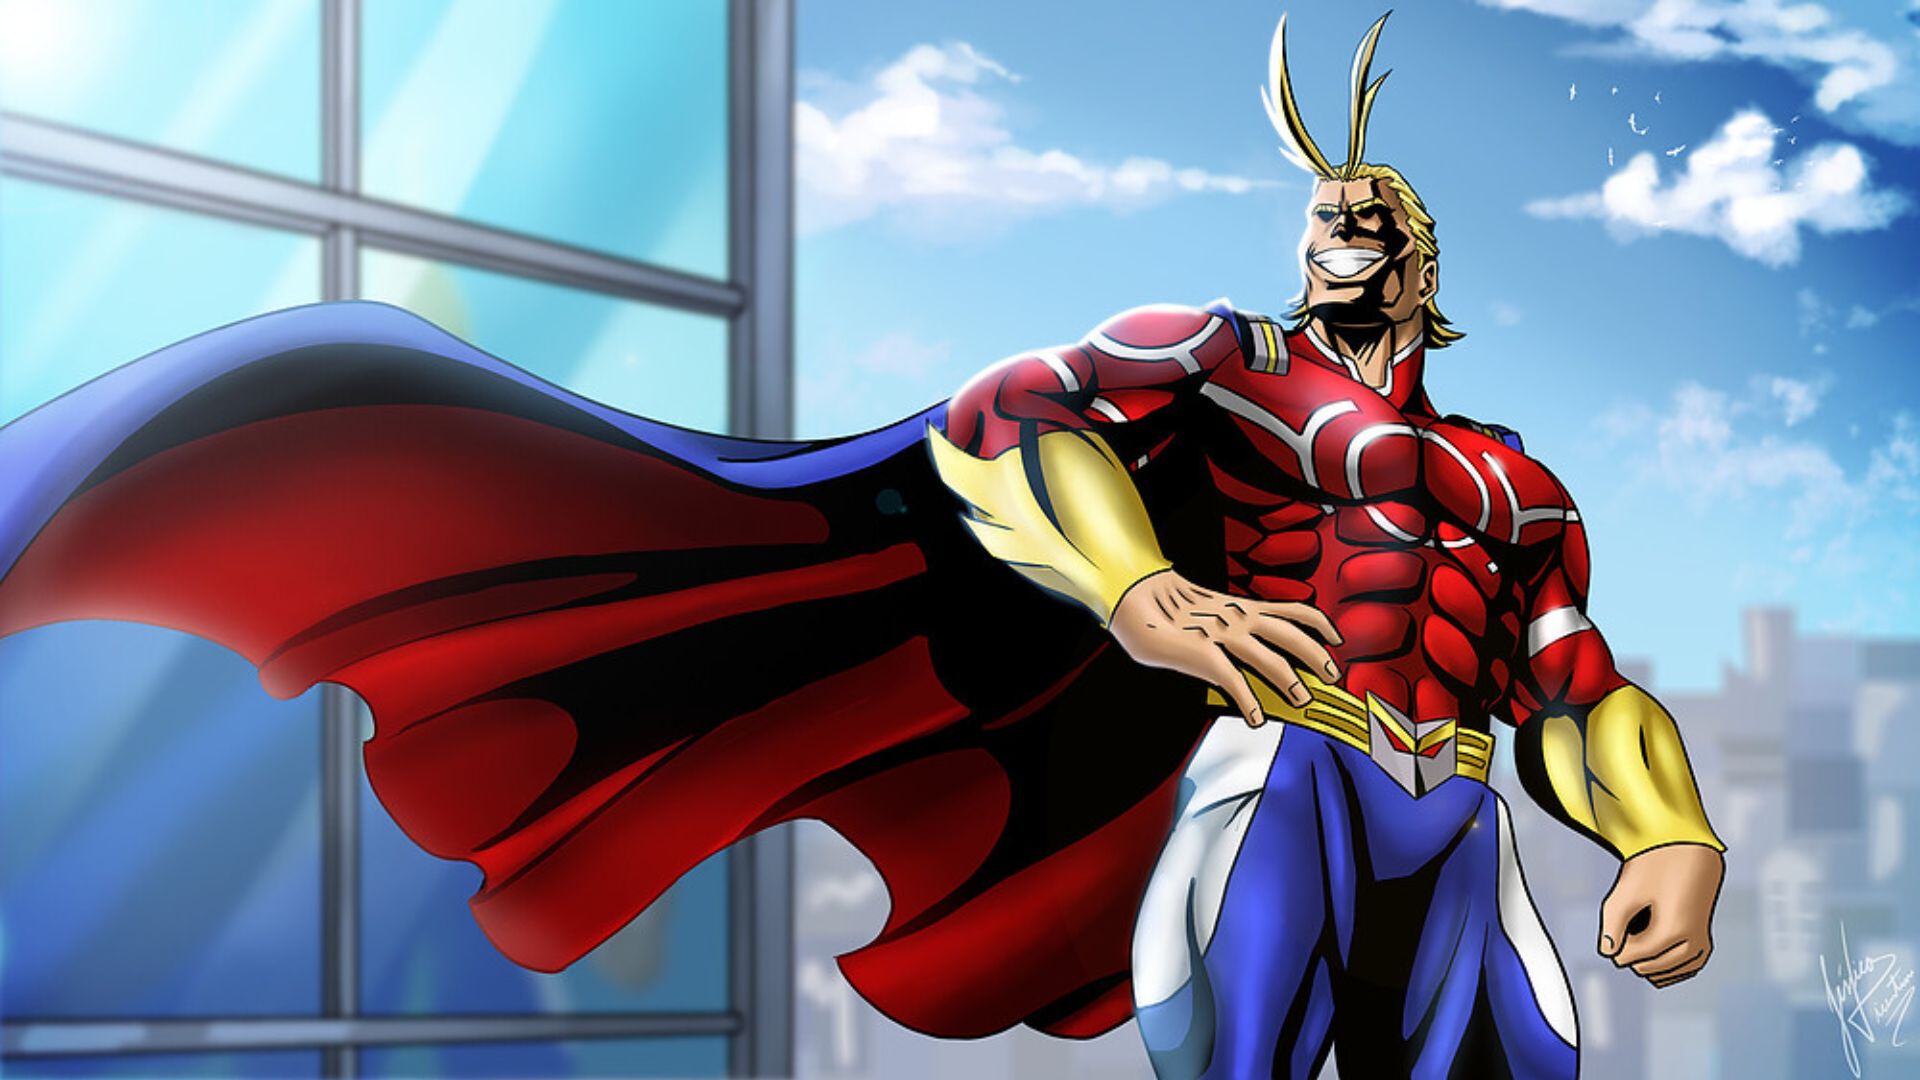 All Might Wallpapers